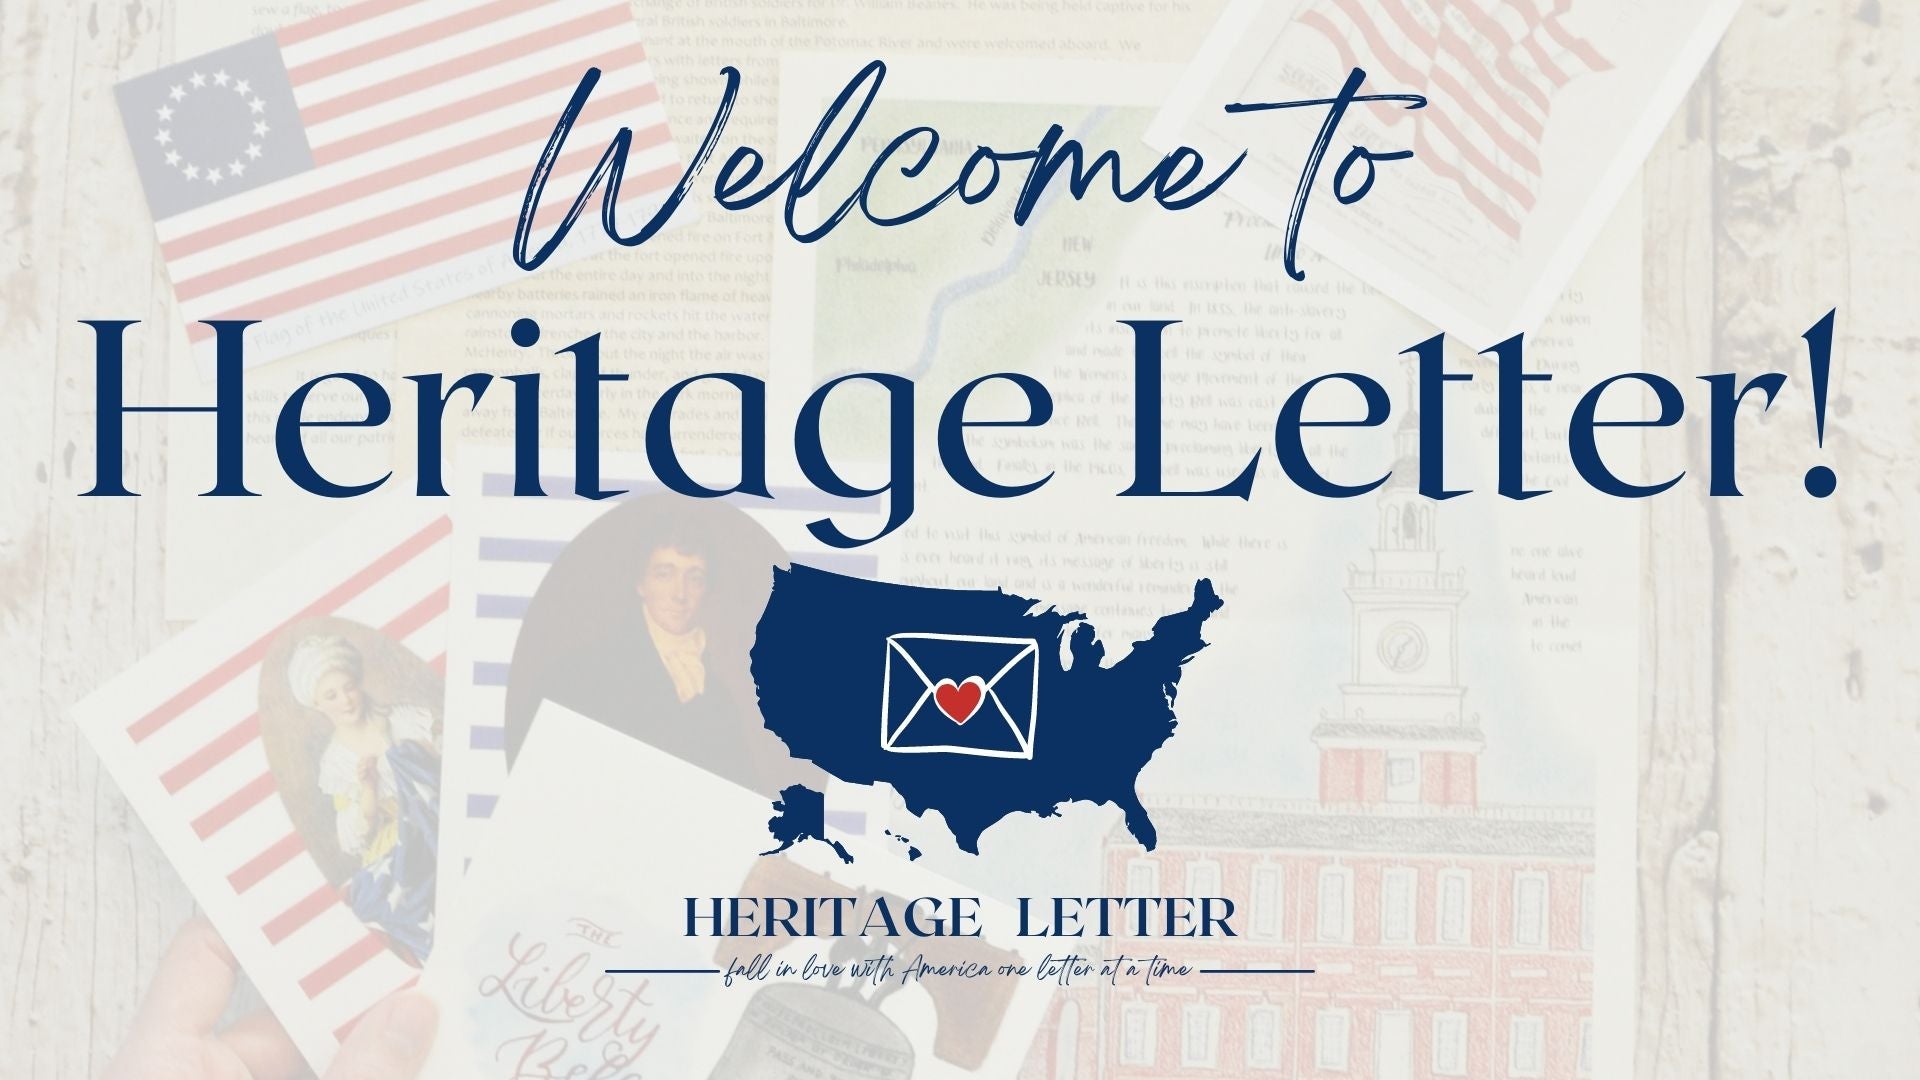 Load video: Welcome to Heritage Letter!